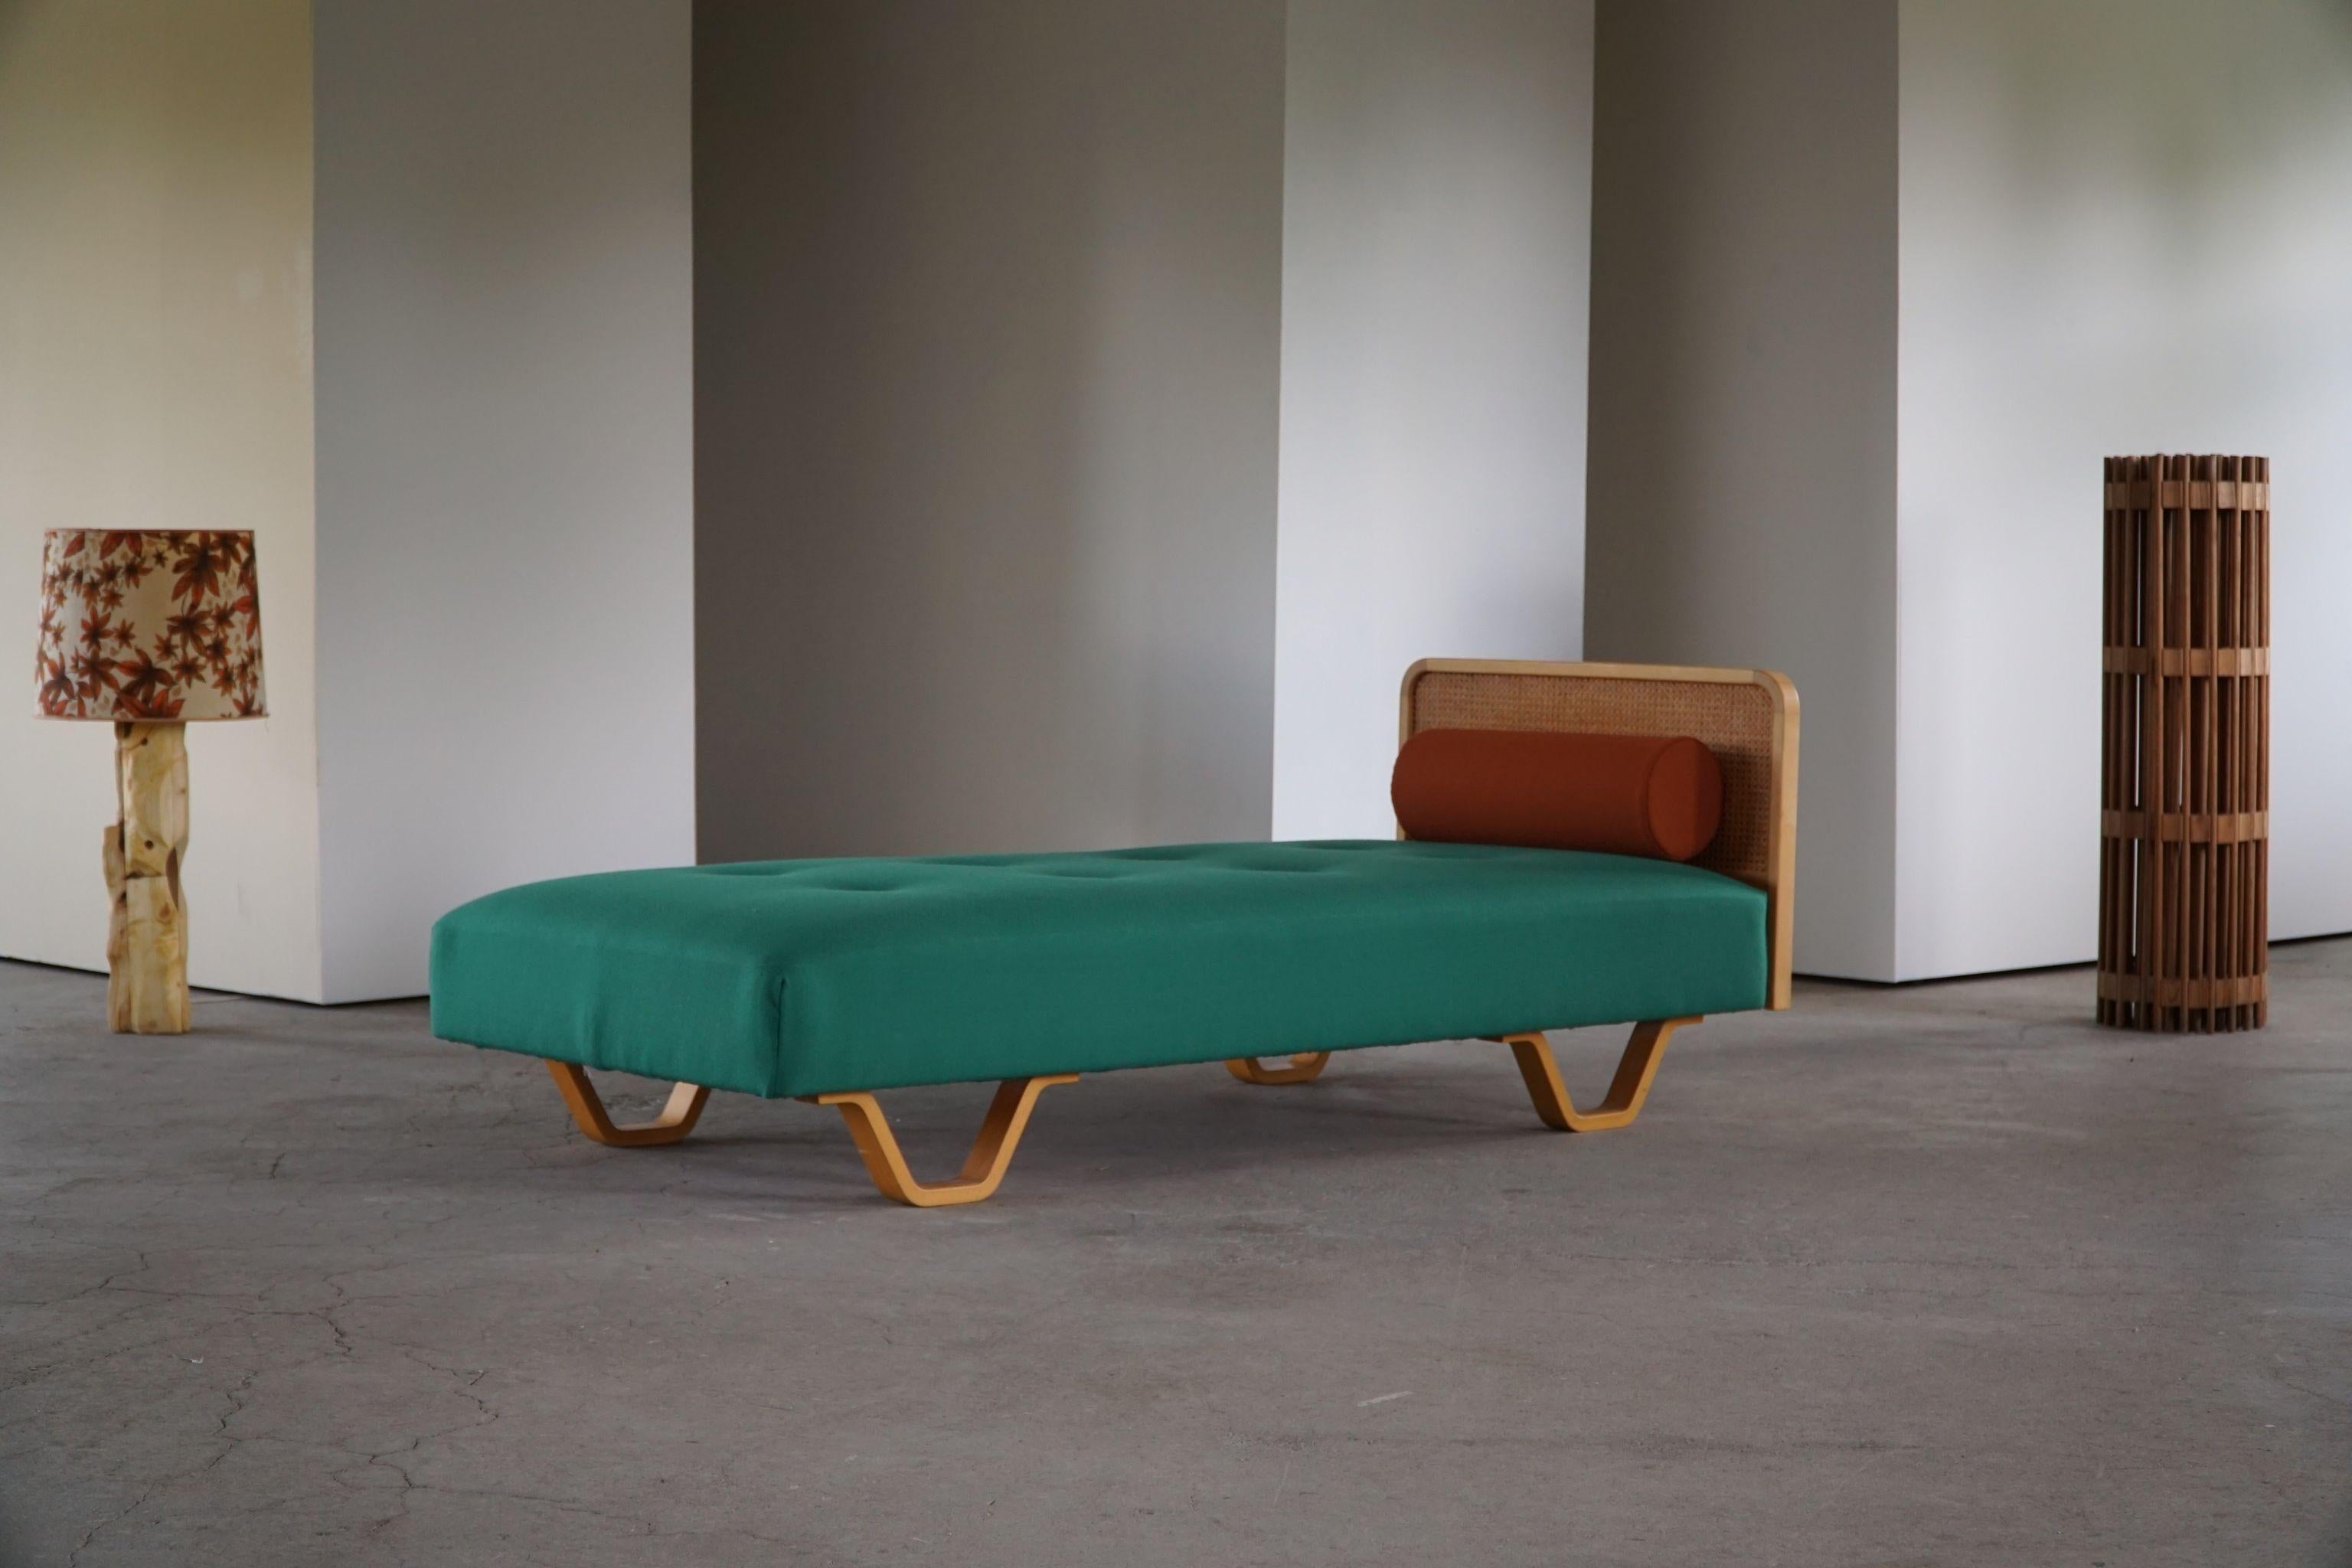 Rare daybed / sofa by GETAMA, Denmark. Reupholstered in green fabric from Kvadrat - great Danish quality. Bed rail in French wicker, legs in solid beech. Fresh colors that complementary the modern interior.

This daybed is in a fantastic vintage